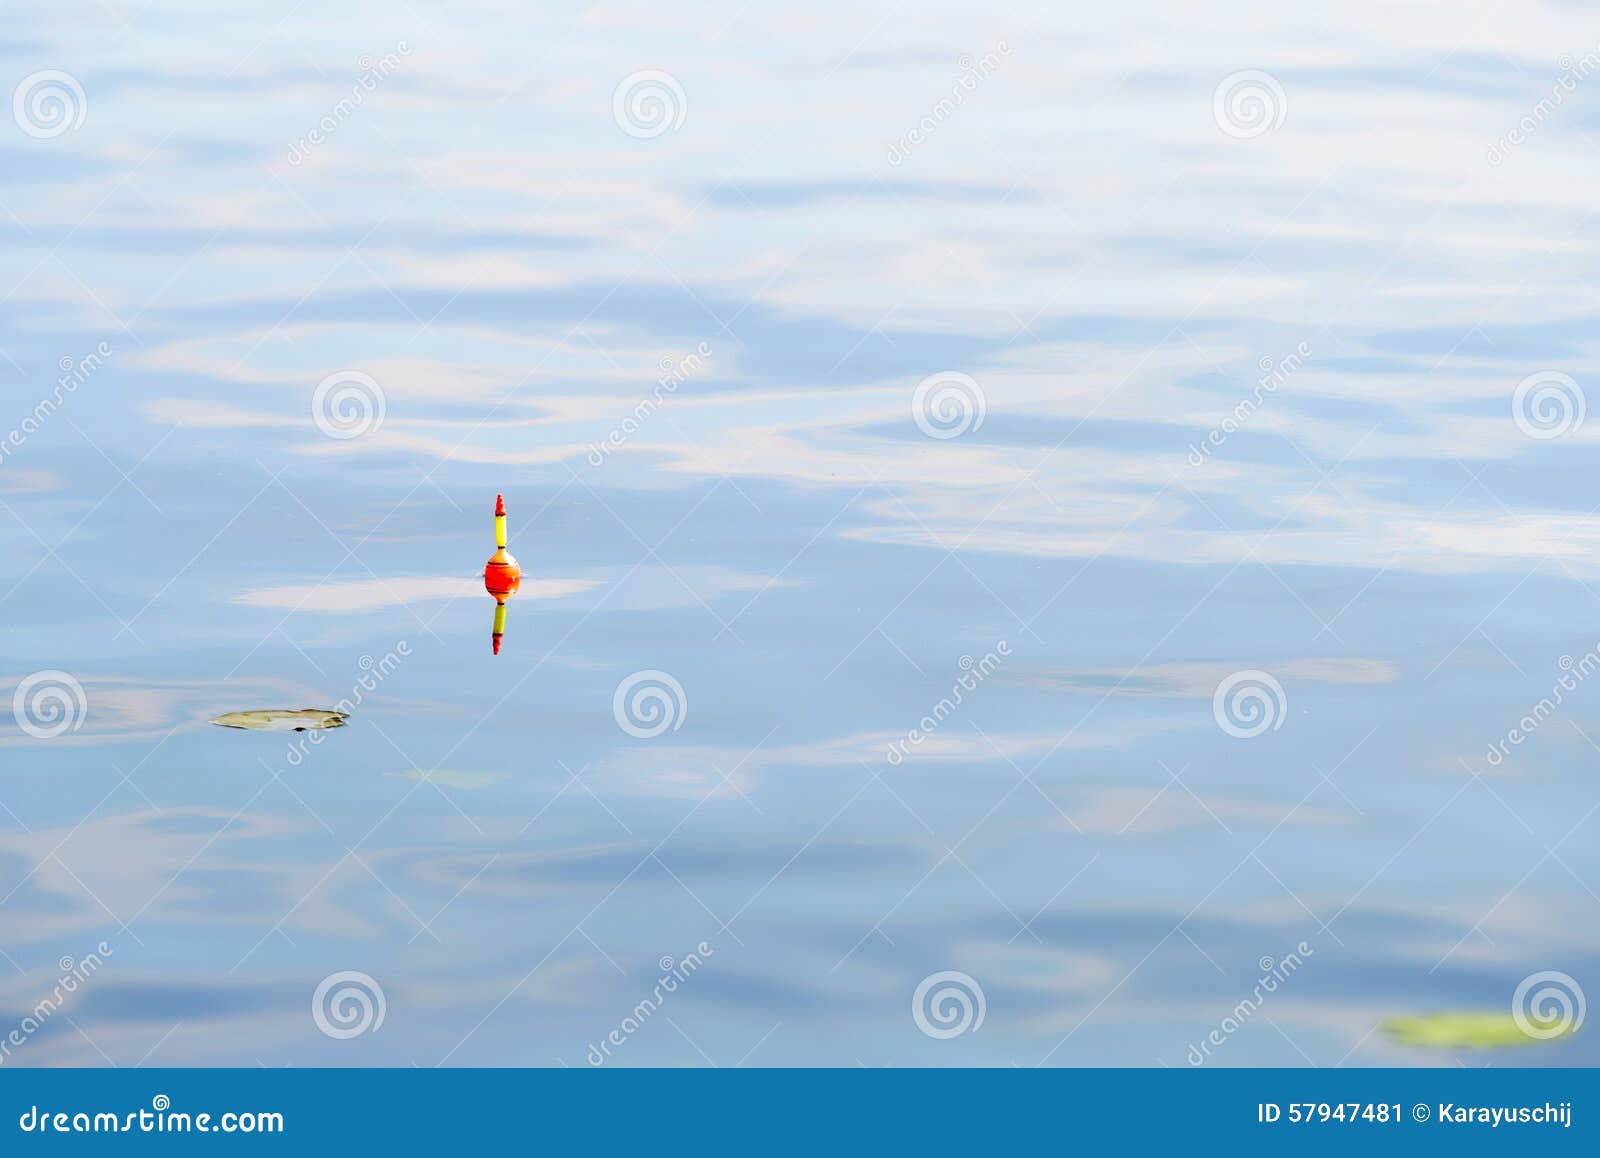 Fishing Floats in Blue Water Stock Image - Image of metaphor, line